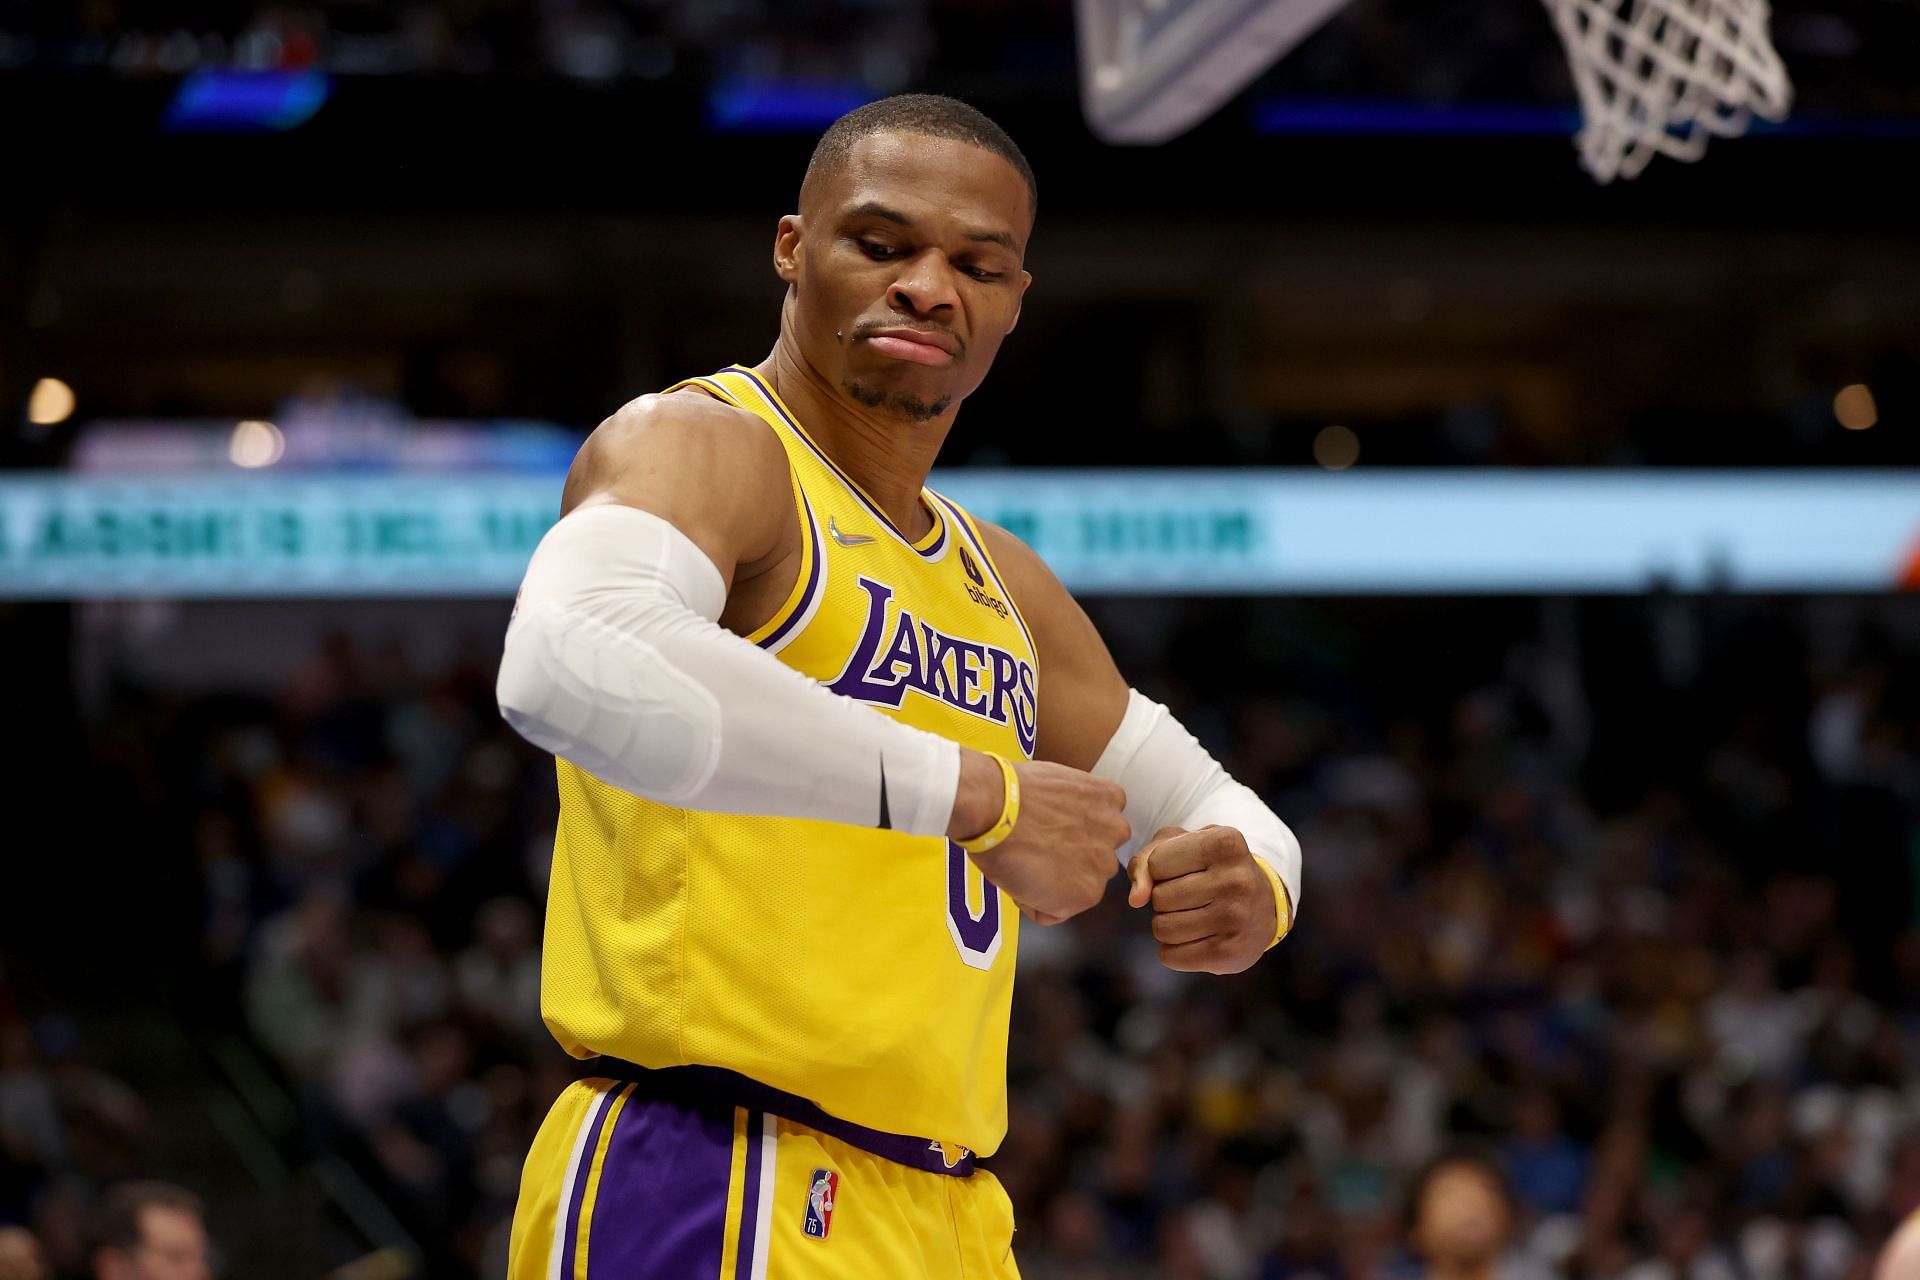 Russell Westbrook #0 of the Los Angeles Lakers reacts against the Dallas Mavericks in the second half at American Airlines Center on December 15, 2021 in Dallas, Texas.